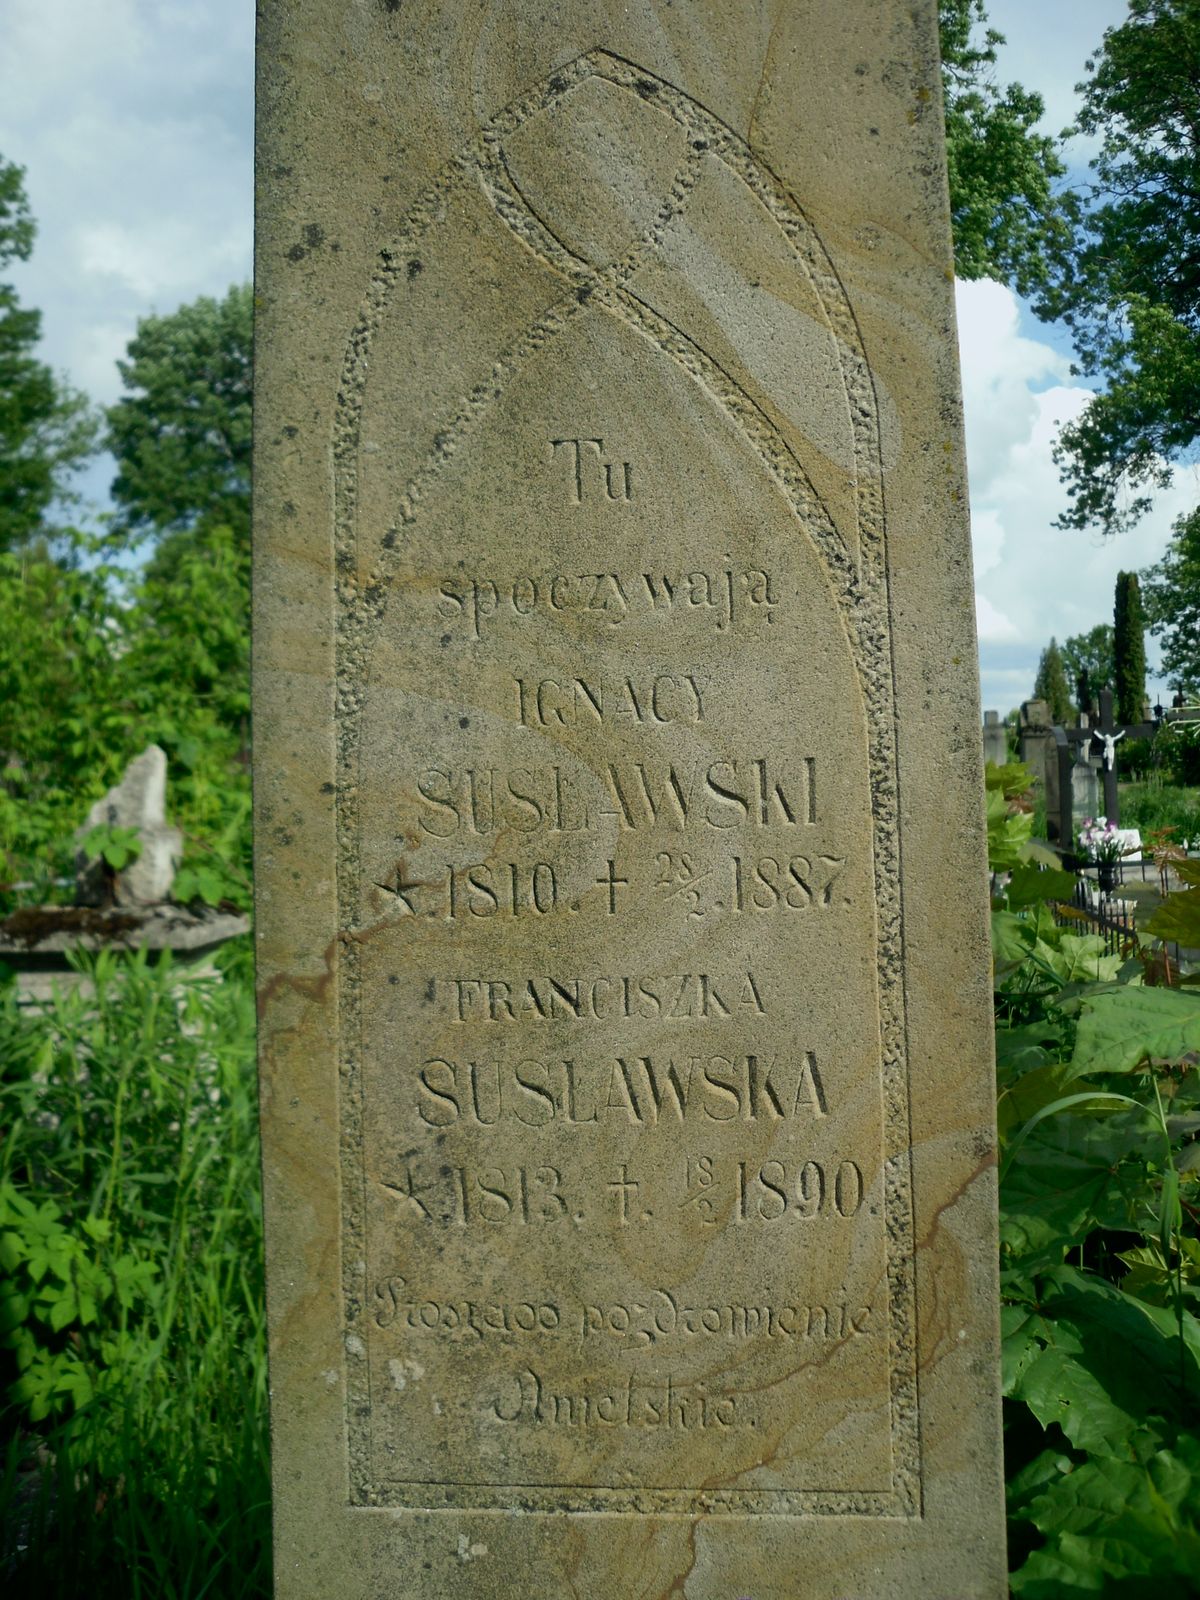 Fragment of a gravestone of Franciszka and Ignacy Suslawski from the cemeteries of the former Ternopil district, as of 2016.